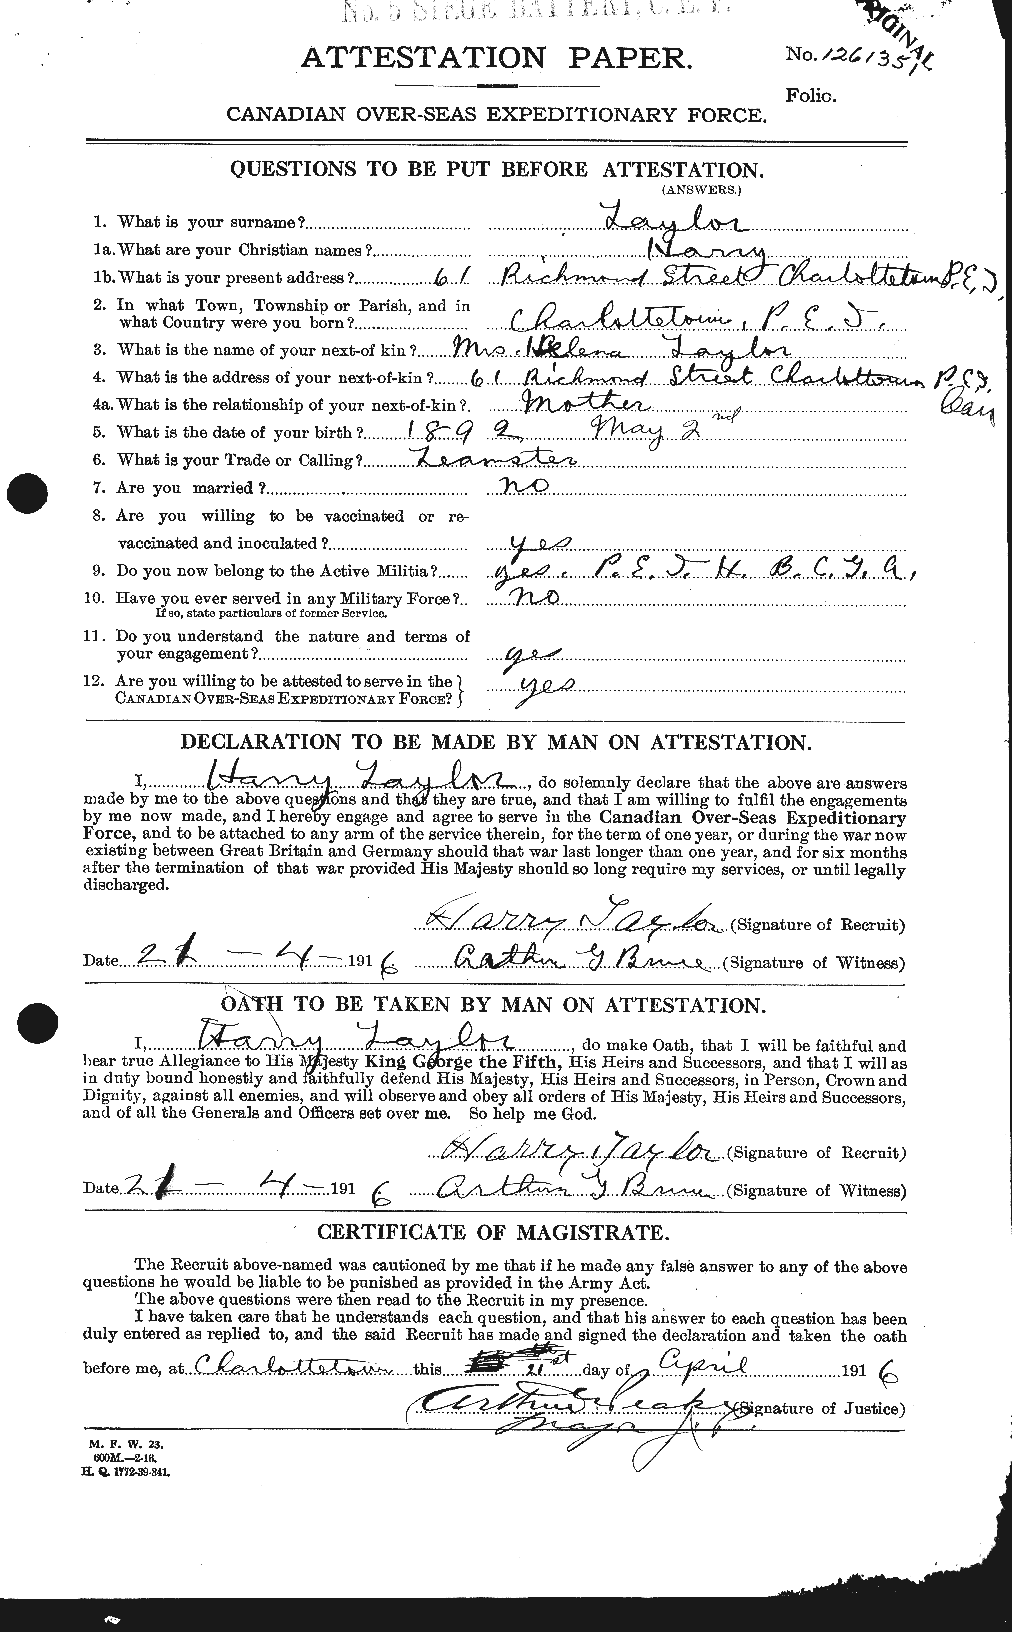 Personnel Records of the First World War - CEF 626466a